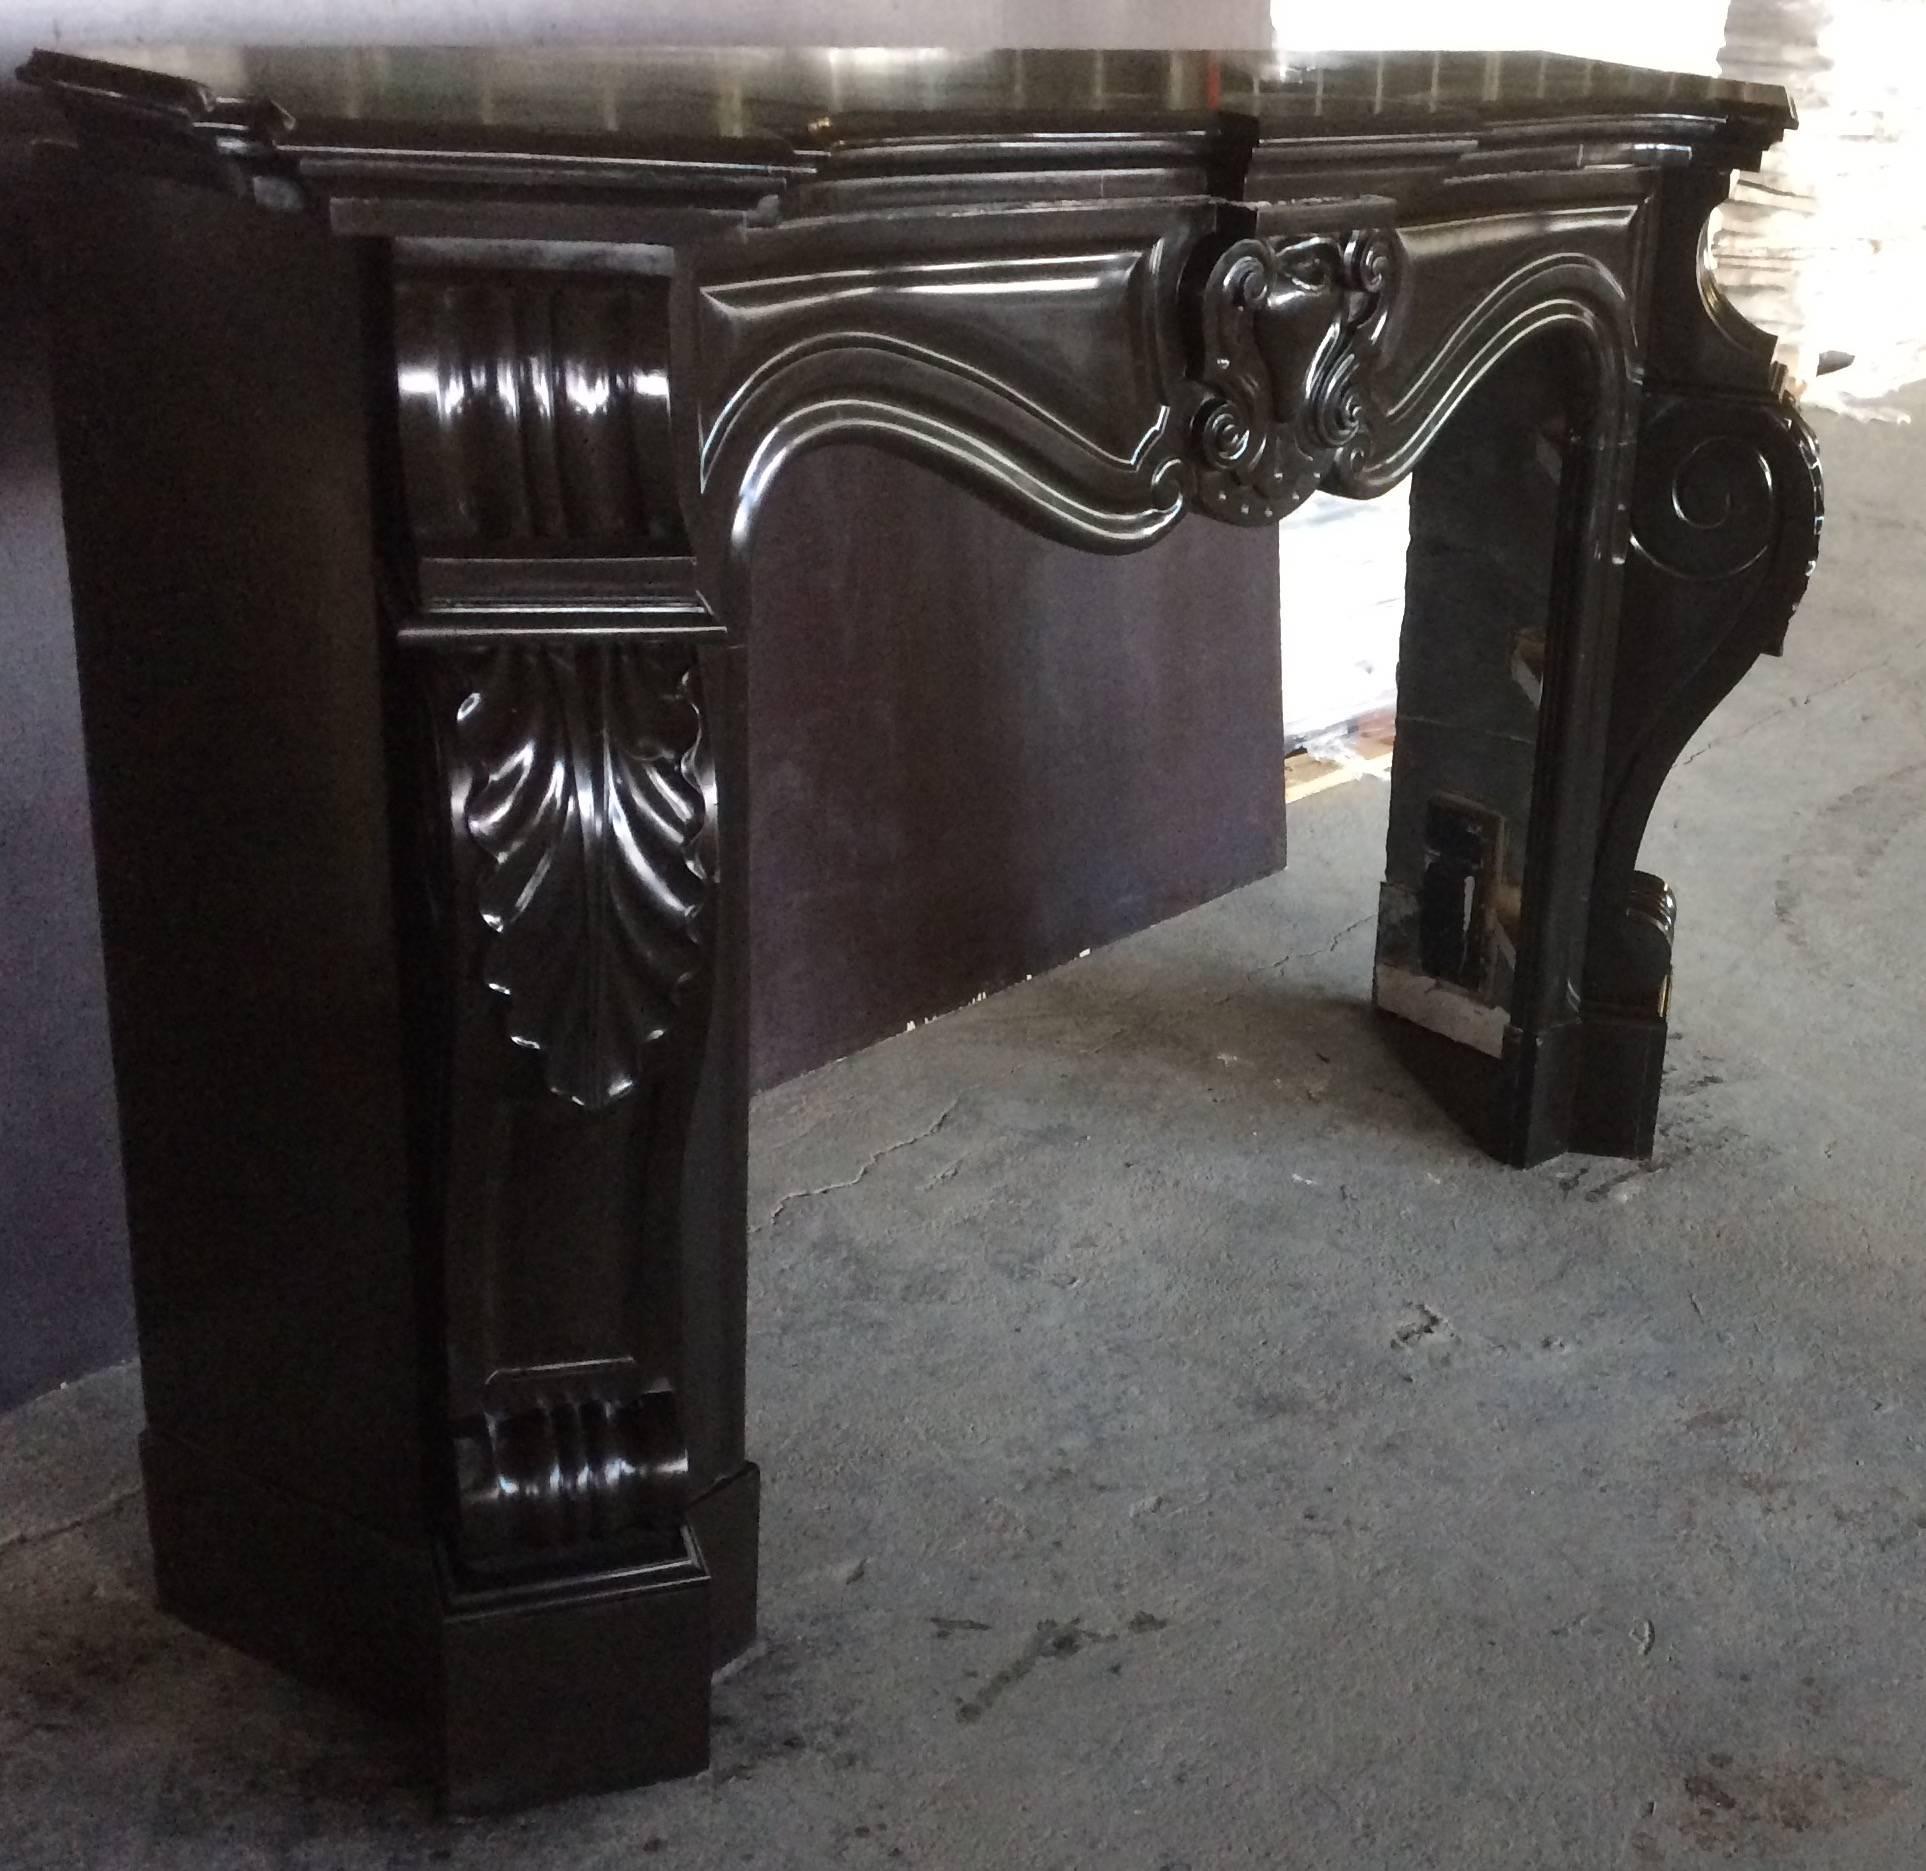 Original French antique Louis XV-Regency style in Belgium black marble, hand-carved, circa 1850s from France.
Excellent quality of Art-work from that period, great quality of hand-carving, shell on middle of mantel, excellent quality of Art work on